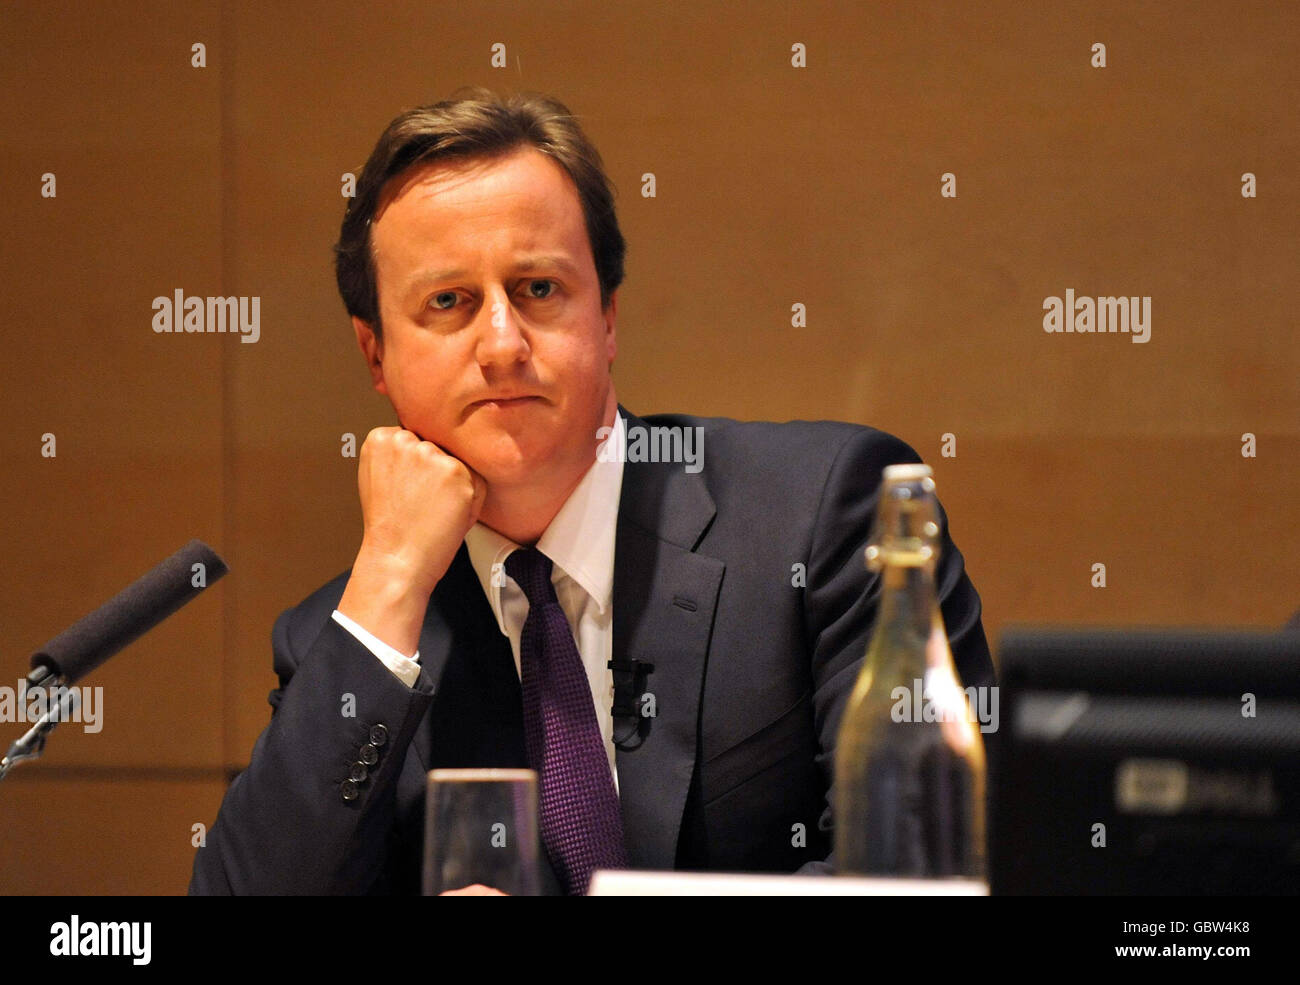 Conservative Party leader David Cameron addresses the Reform think-tank pledging to cut the number of quangos - starting with communications regulator Ofcom, at the Clifford Chance building, in London Docklands. Stock Photo